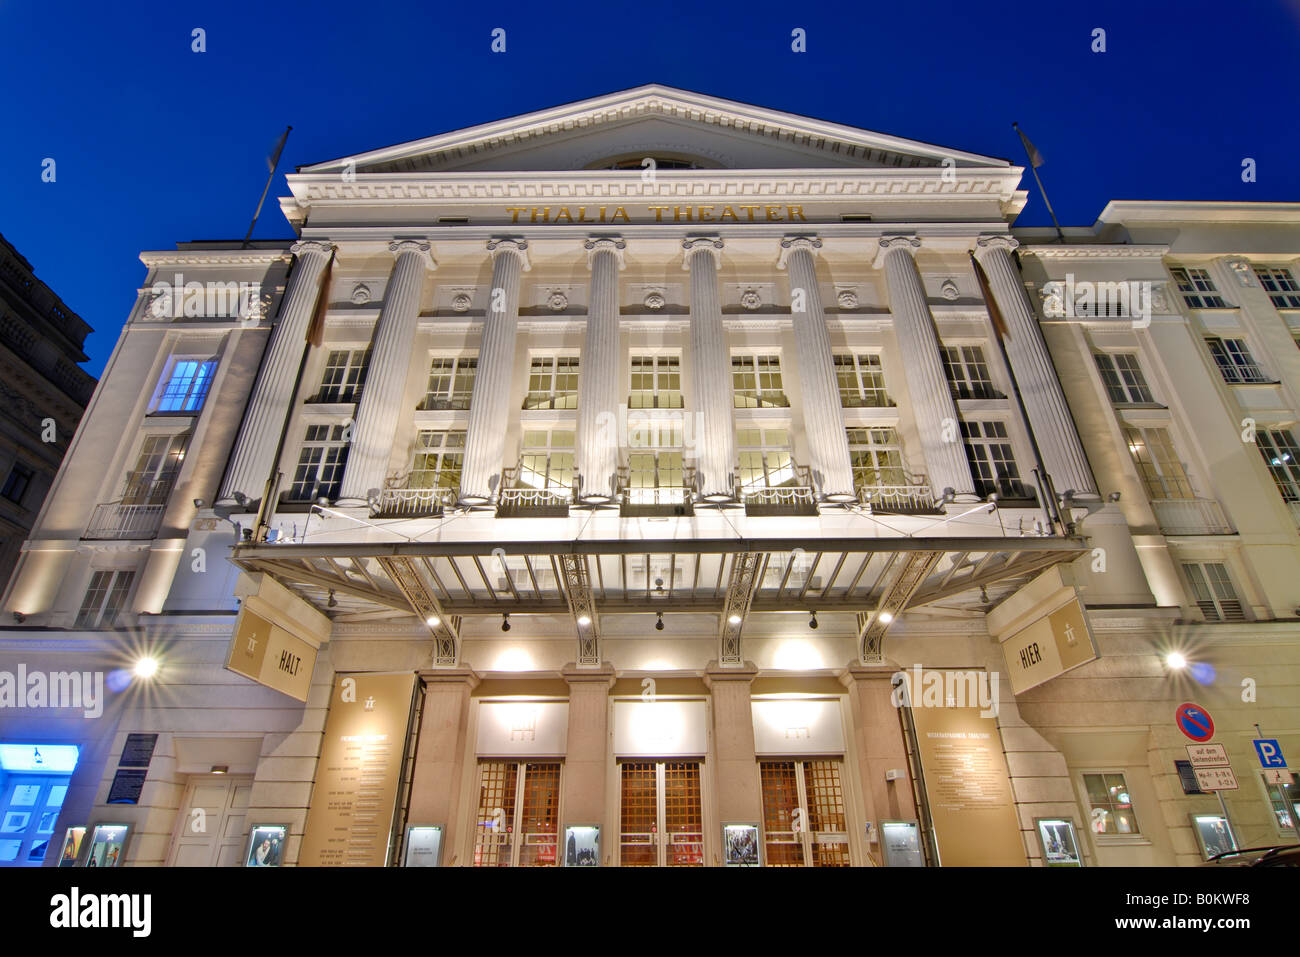 Thalia Theater High Resolution Stock Photography and Images - Alamy